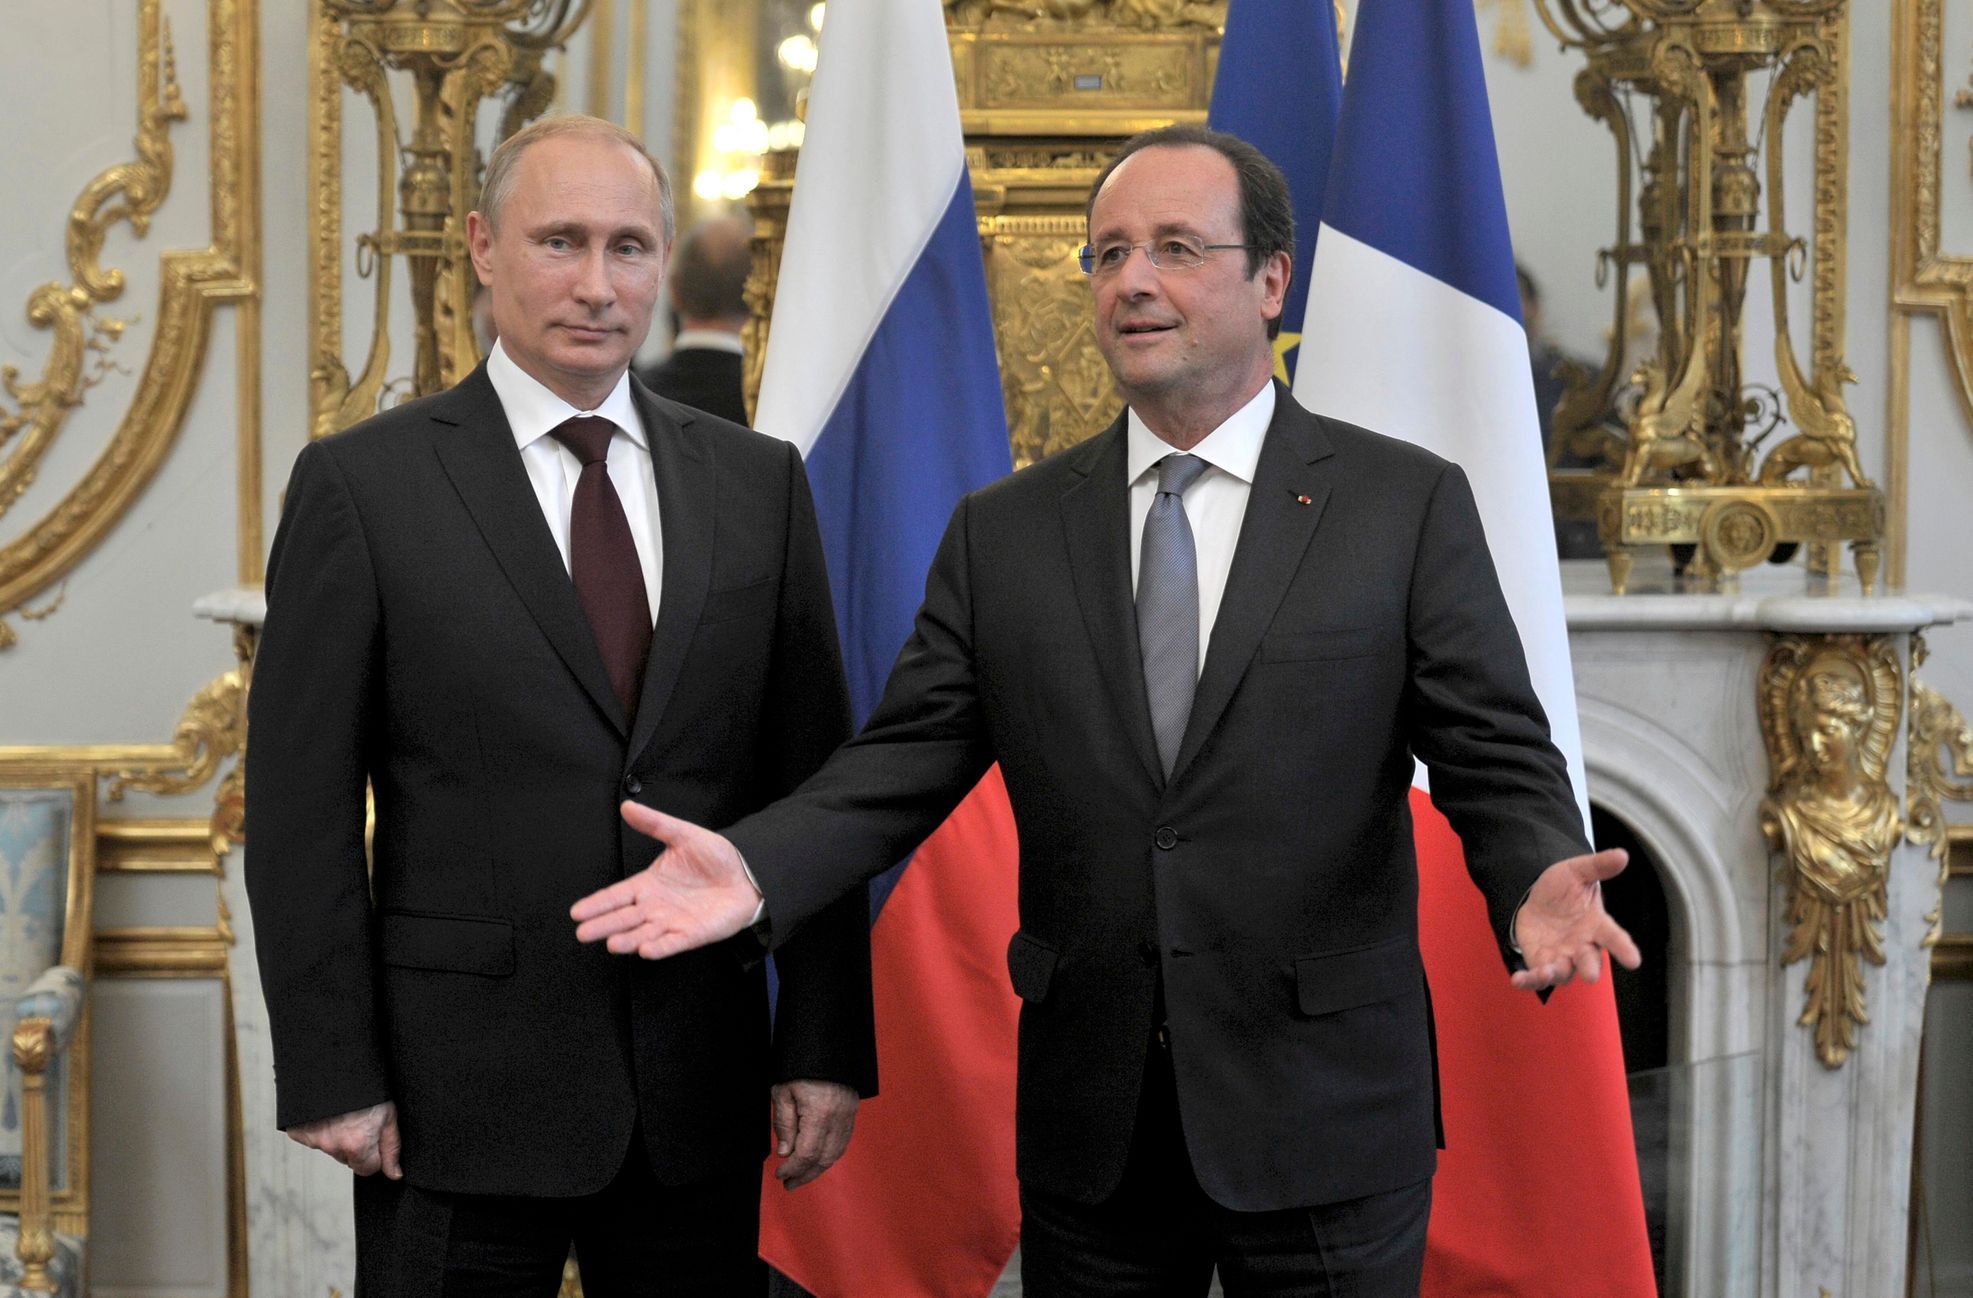 Russian President Vladimir Putin welcomed by France's President Hollande at the Elysee Palace in Paris